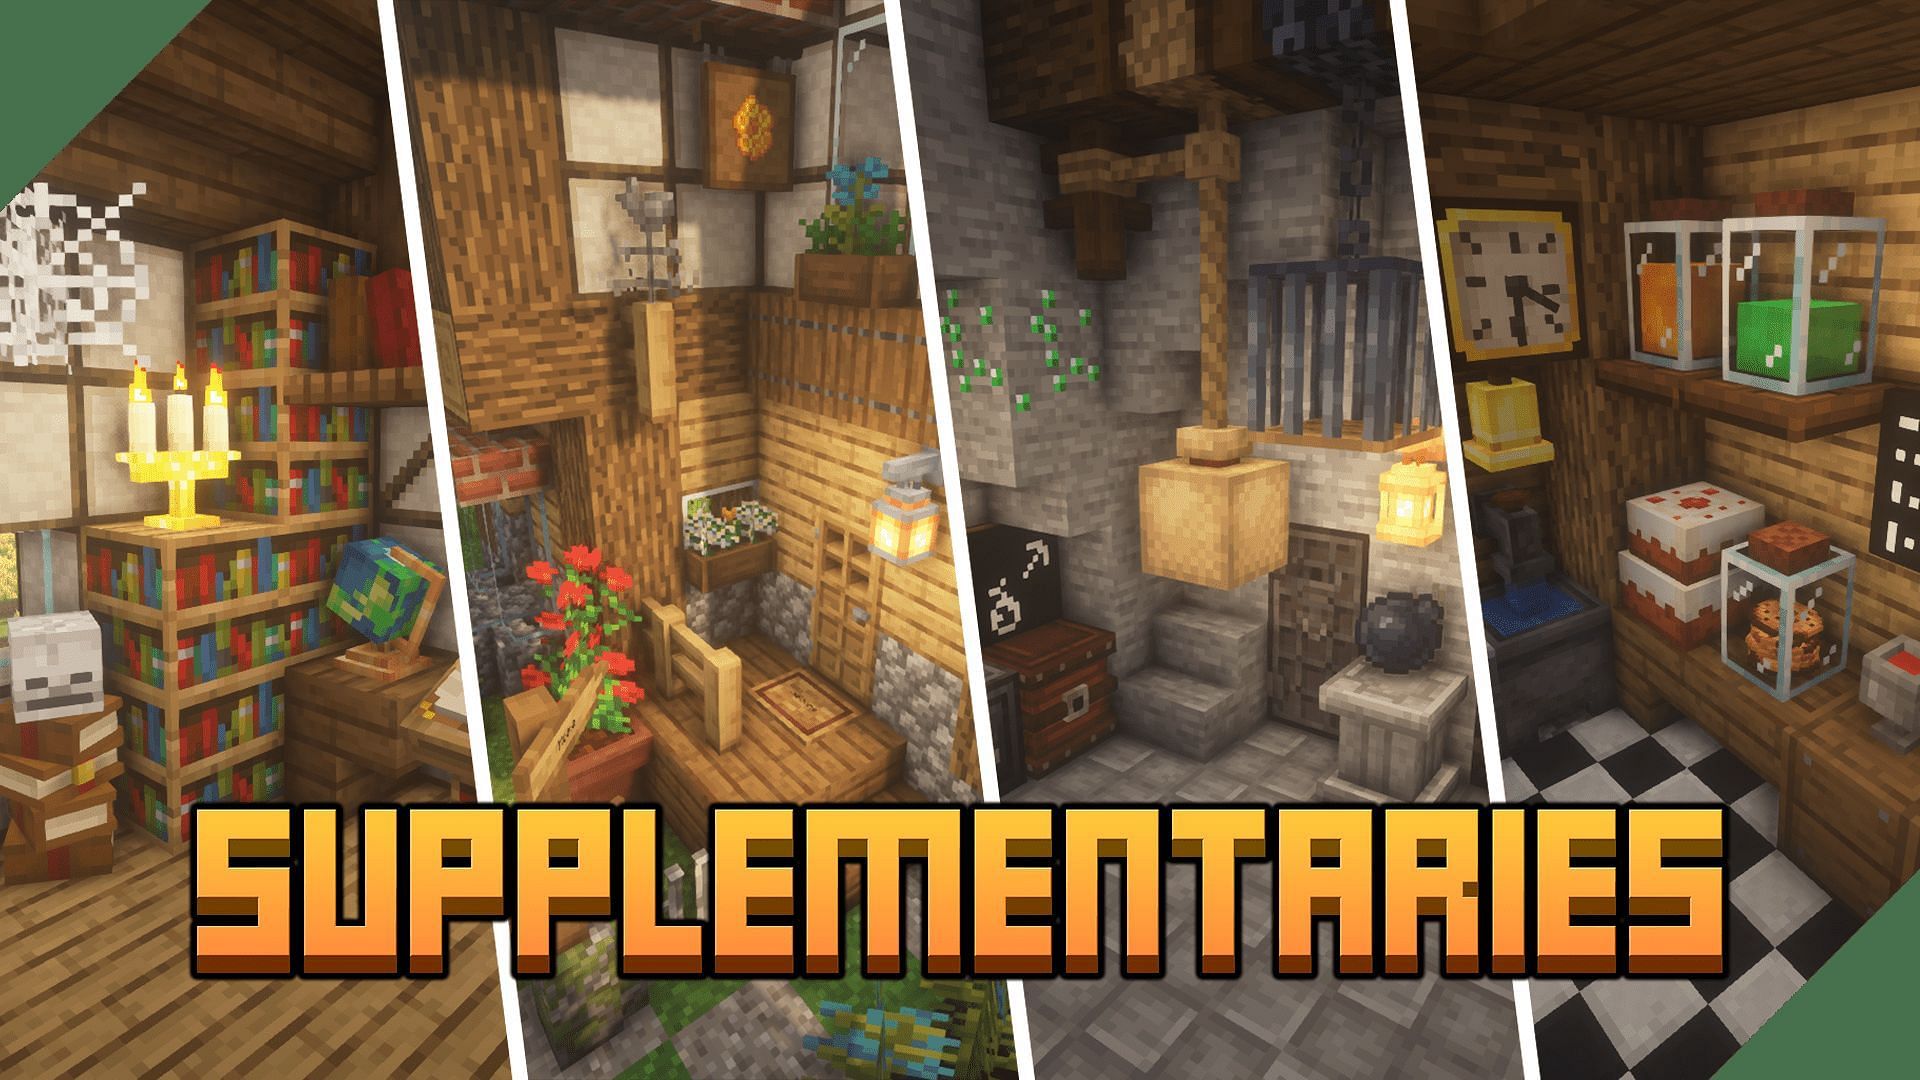 Supplementaries offers a wide range of cozy decorations for Minecraft players to craft (Image via MehVadJukaar/Modrinth)